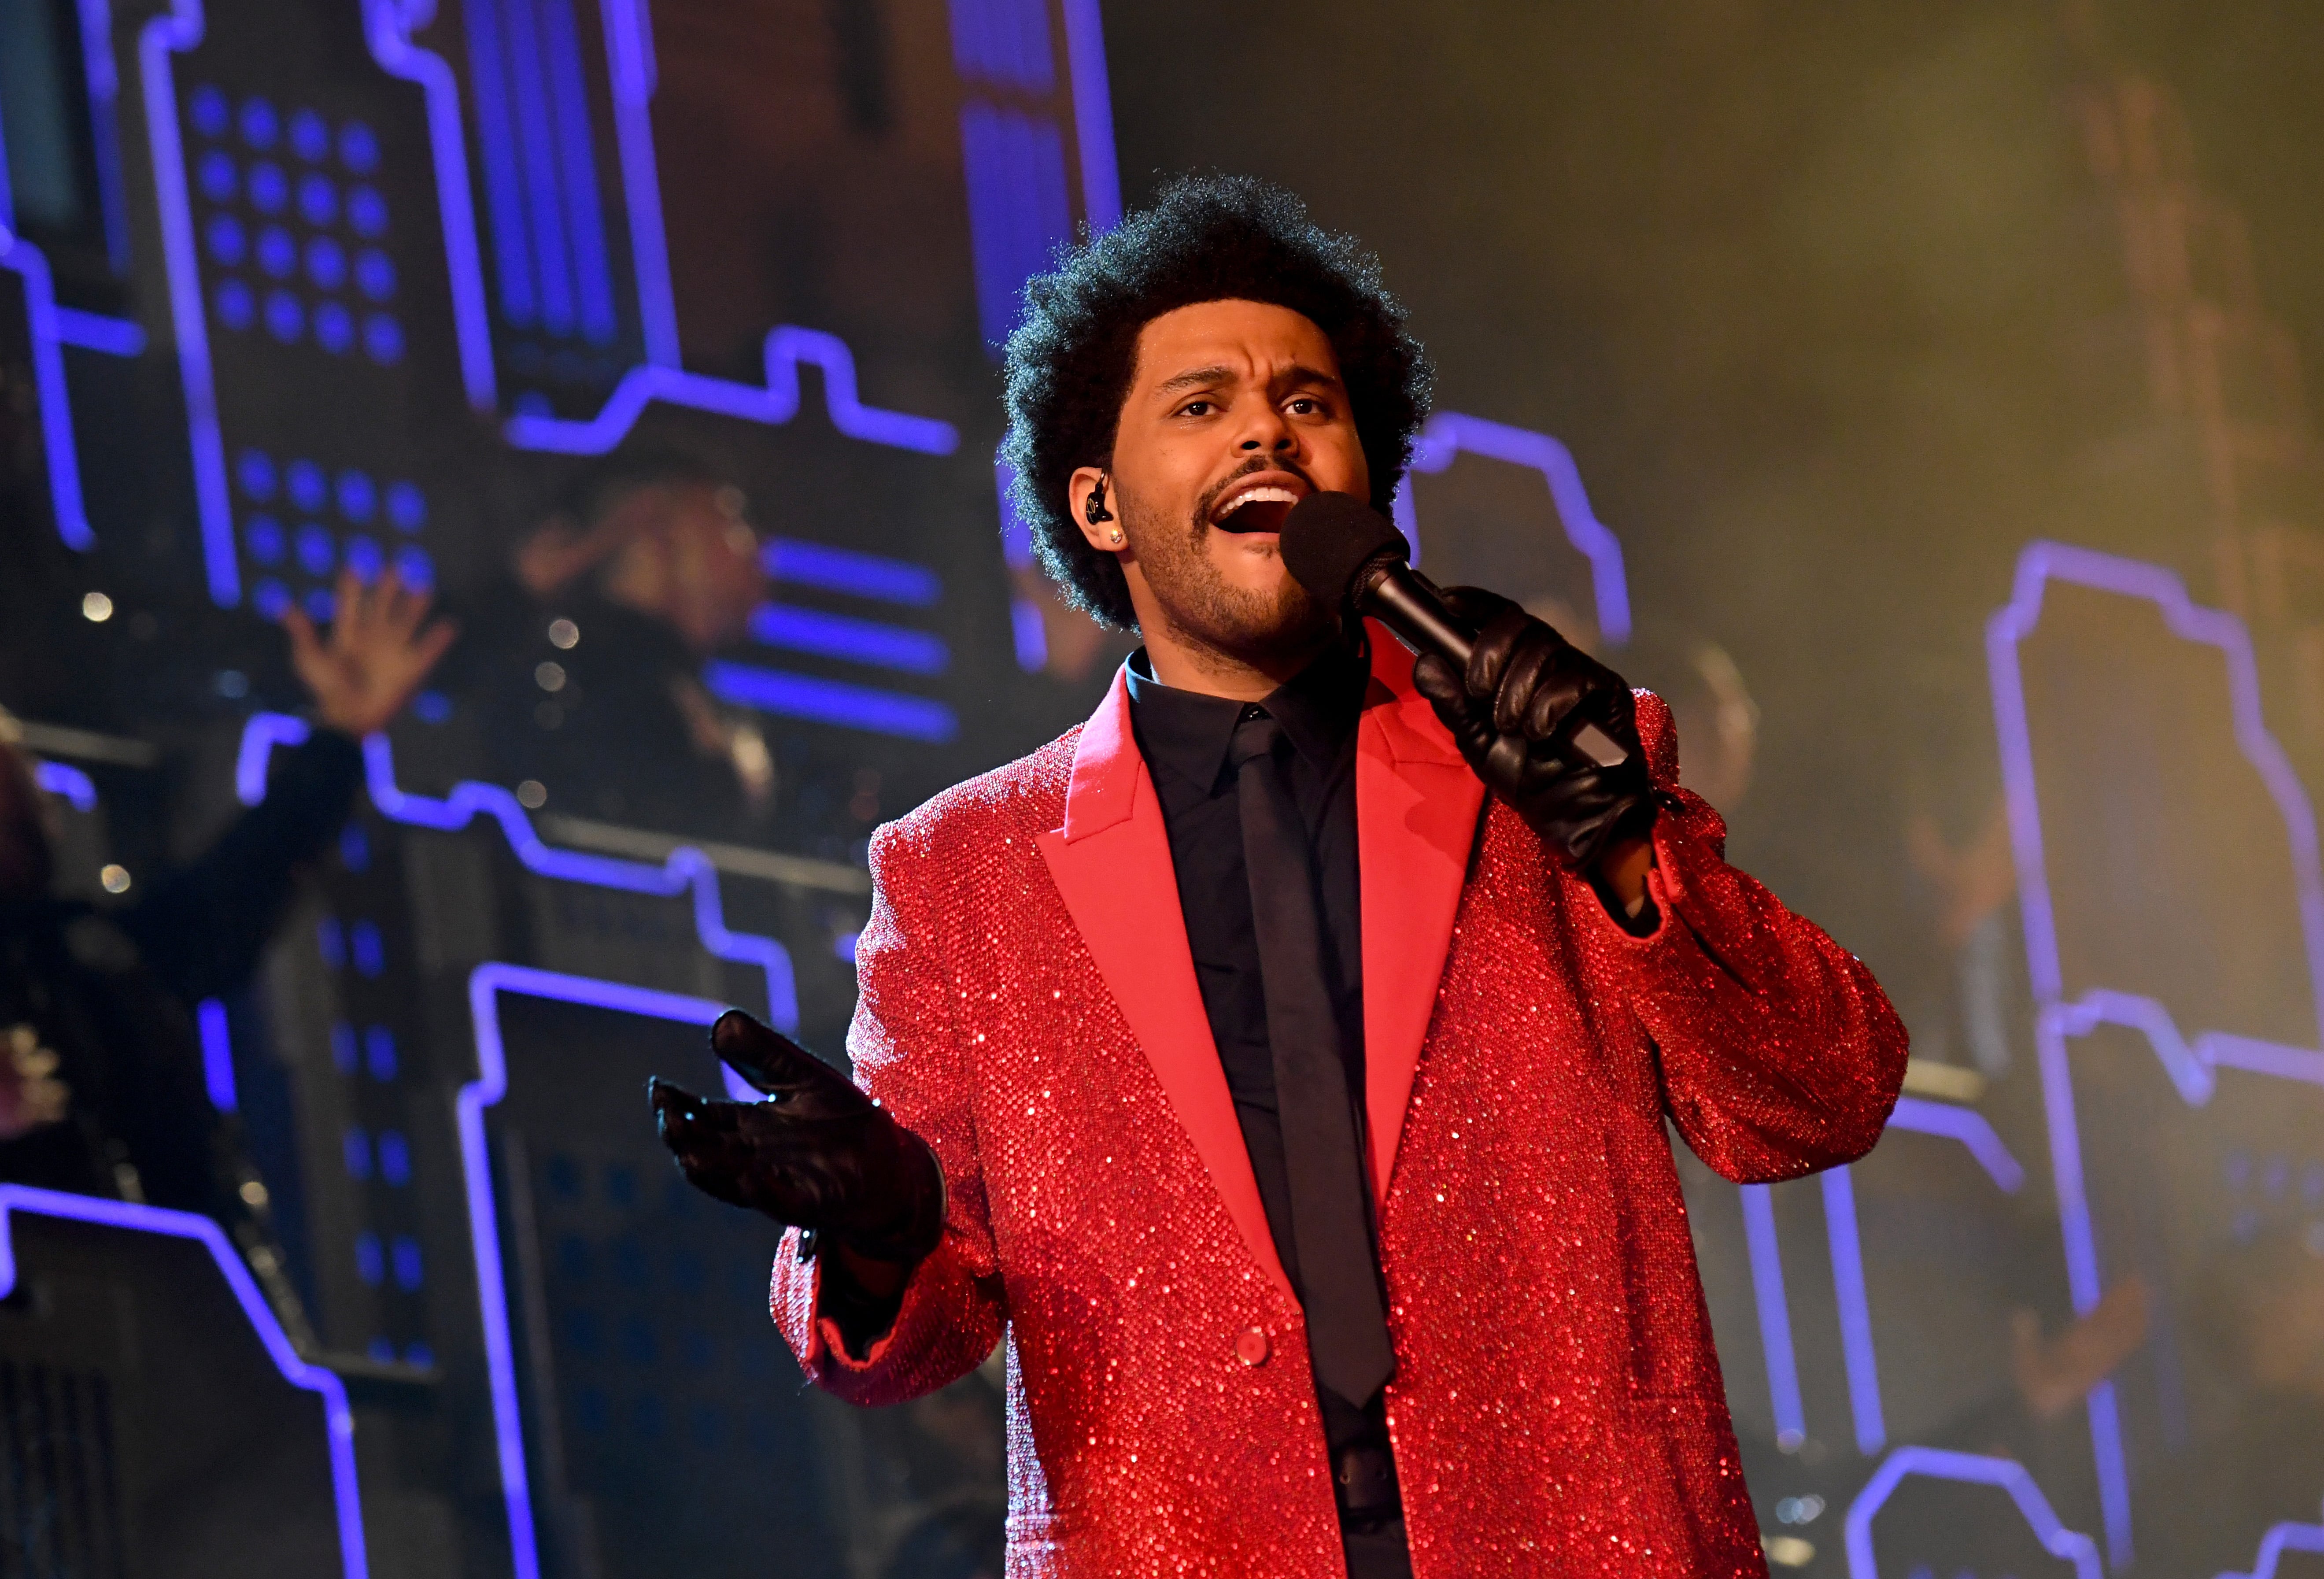 Super Bowl The Weeknd Red Blazer - New American Jackets